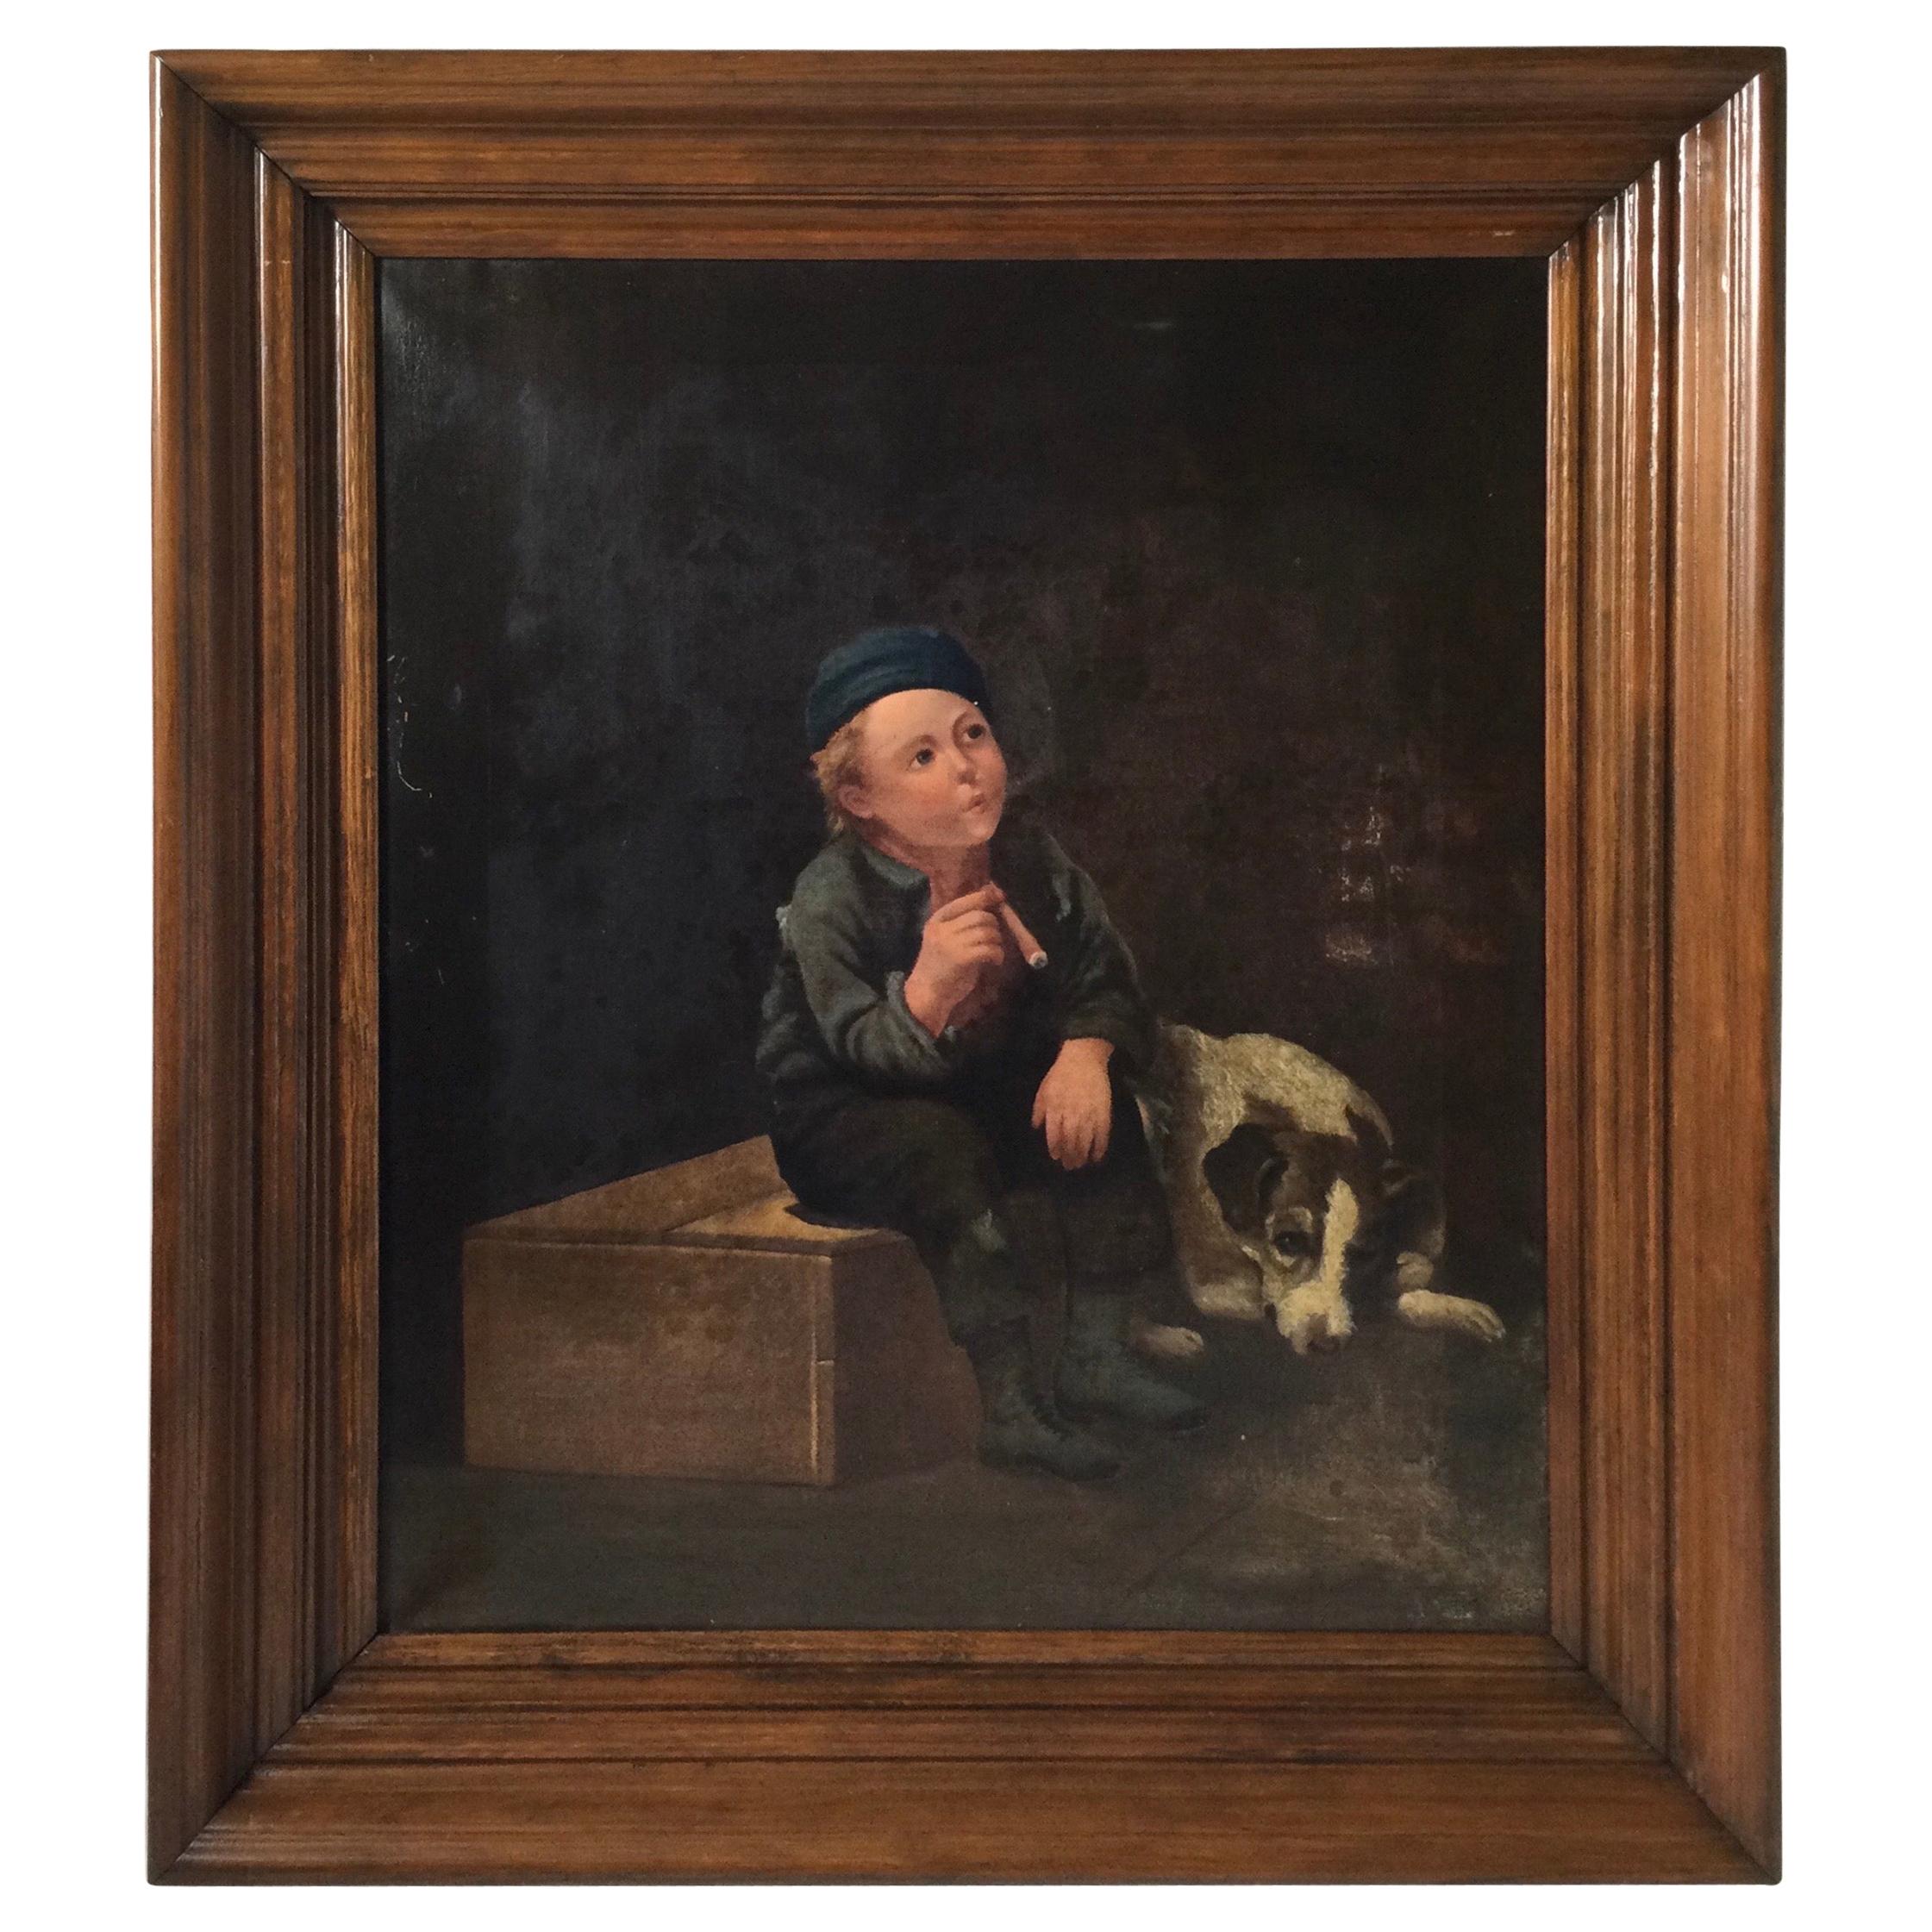 Later 19th Century European Painting of a Child with Dog